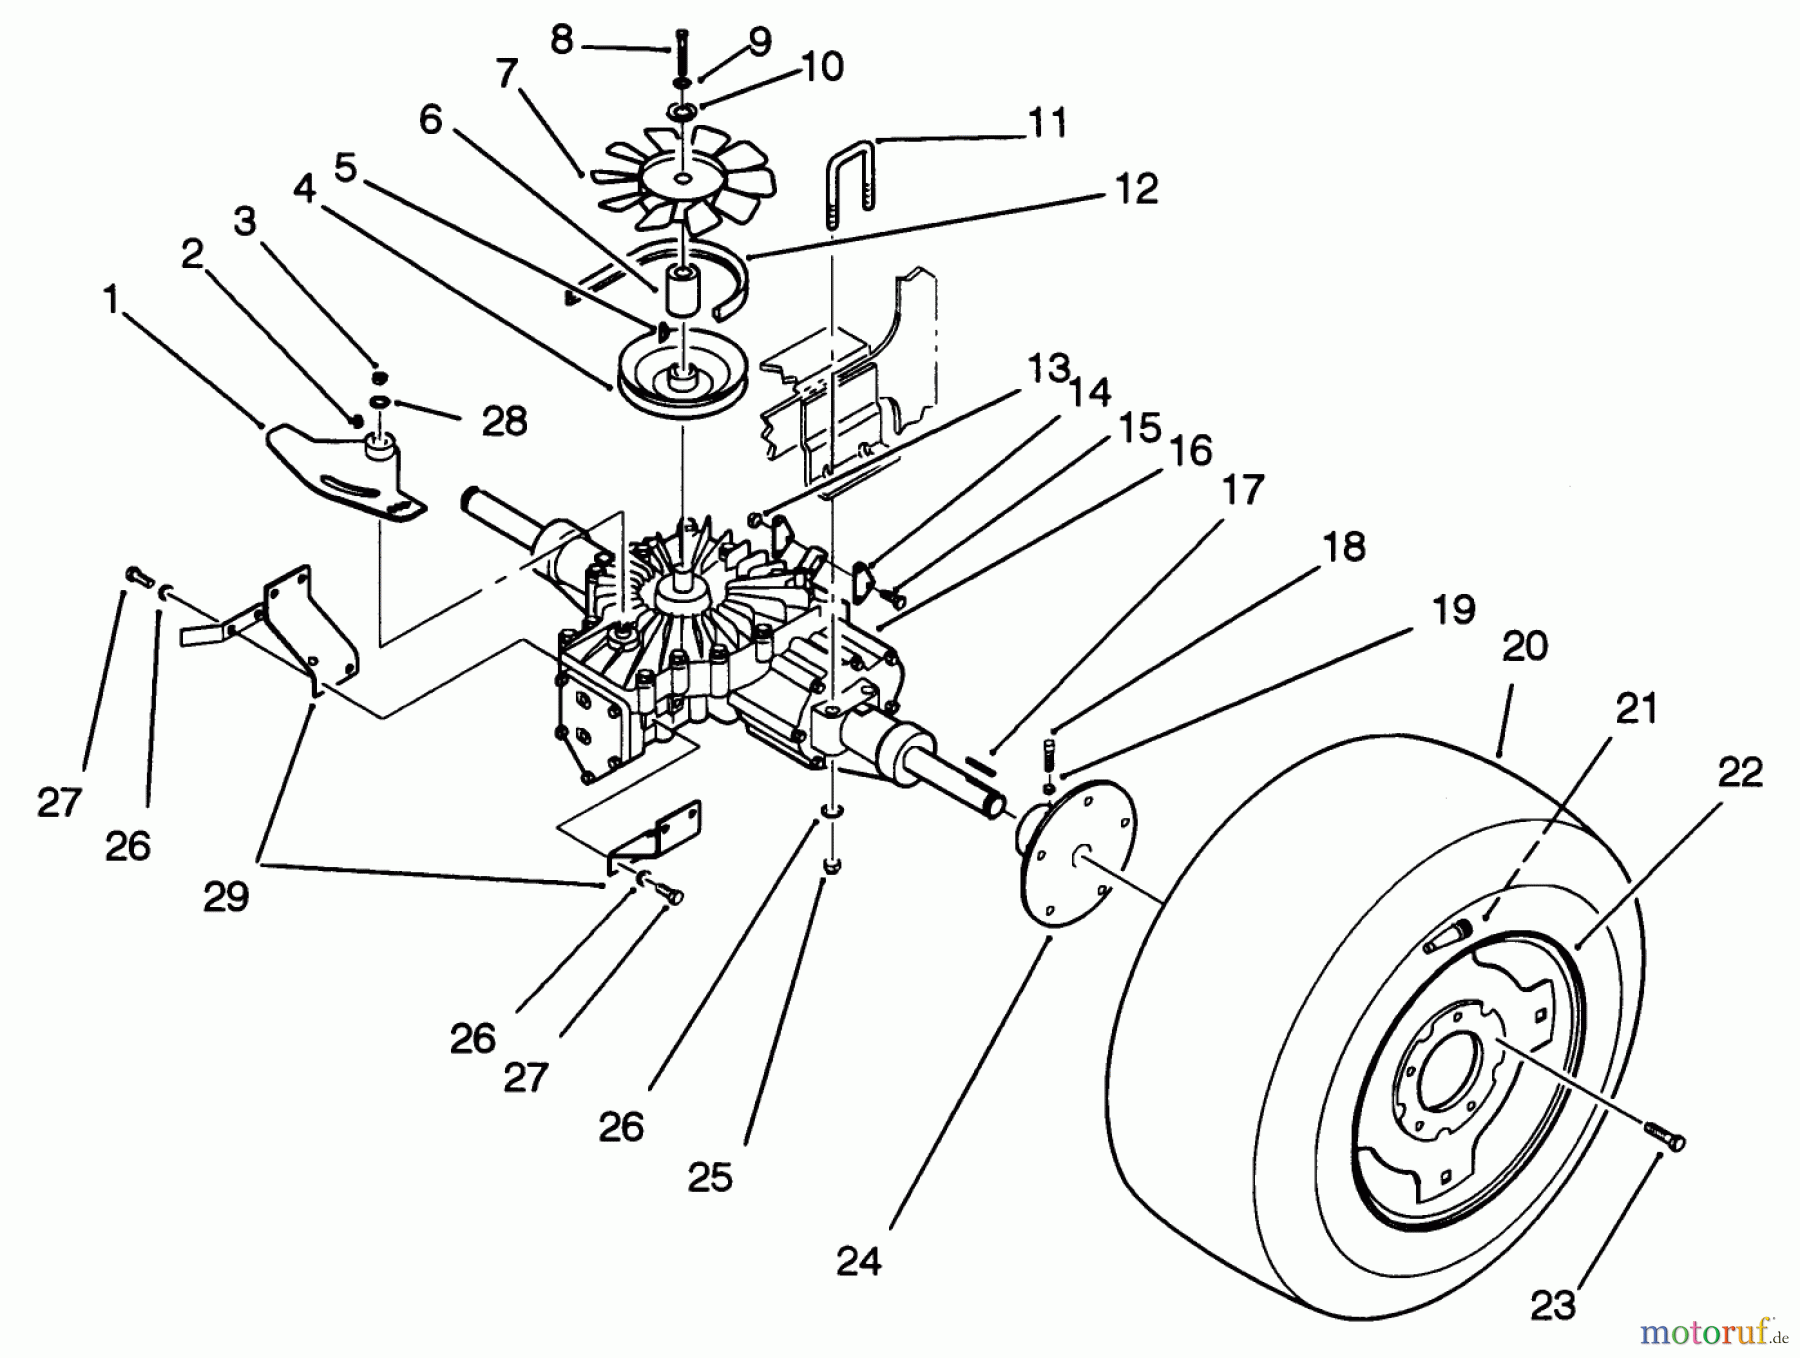  Toro Neu Mowers, Lawn & Garden Tractor Seite 1 22-14OE02 (244-H) - Toro 244-H Yard Tractor, 1992 (2000001-2999999) REAR WHEEL AND TRANSMISSION ASSEMBLY